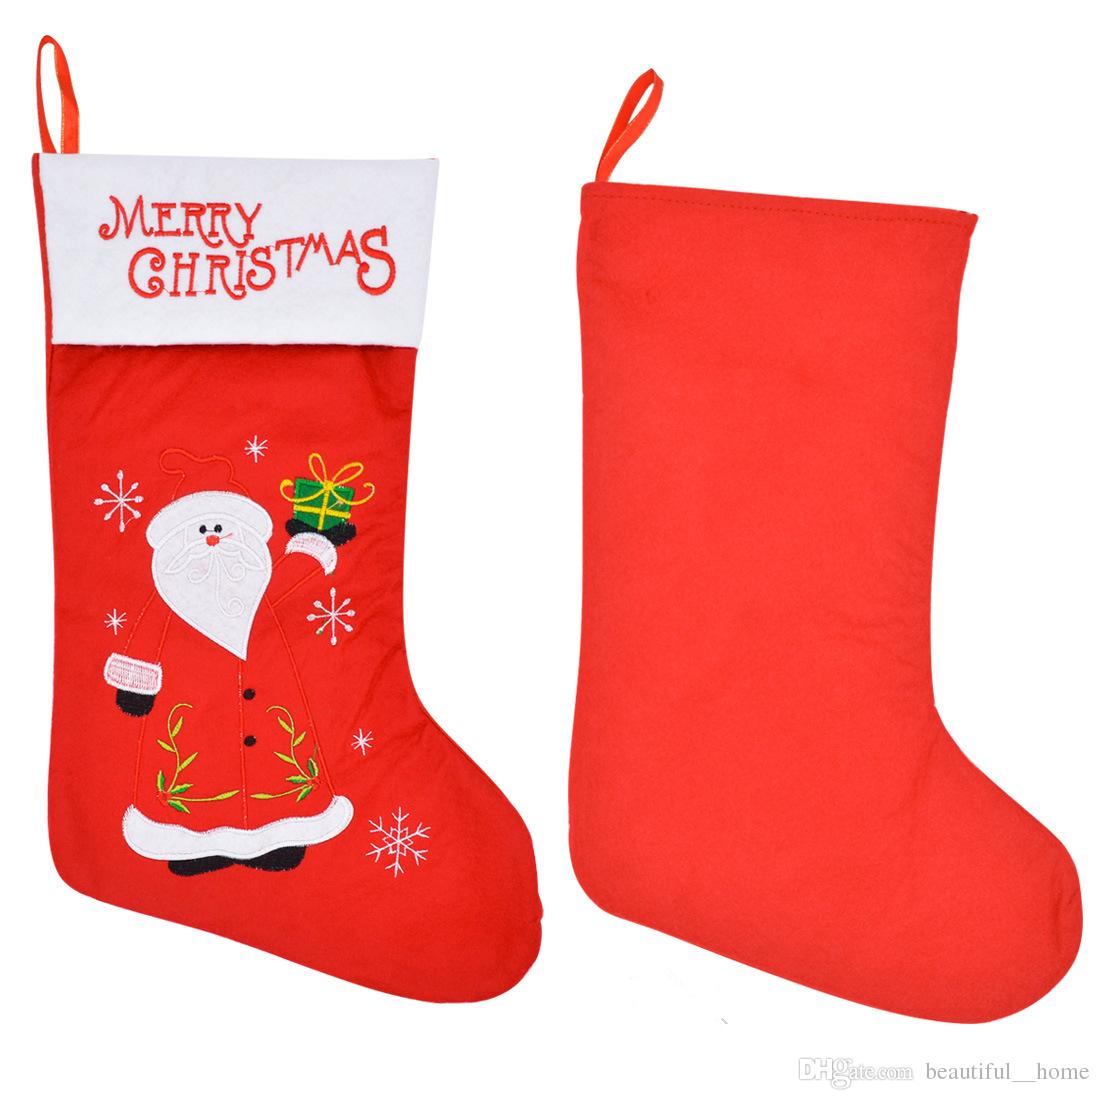 Fireplace ornaments Beautiful 2019 Christmas ornament Bag T Bag Stocking sock Fireplace Surround Stocking with Christmas Candy